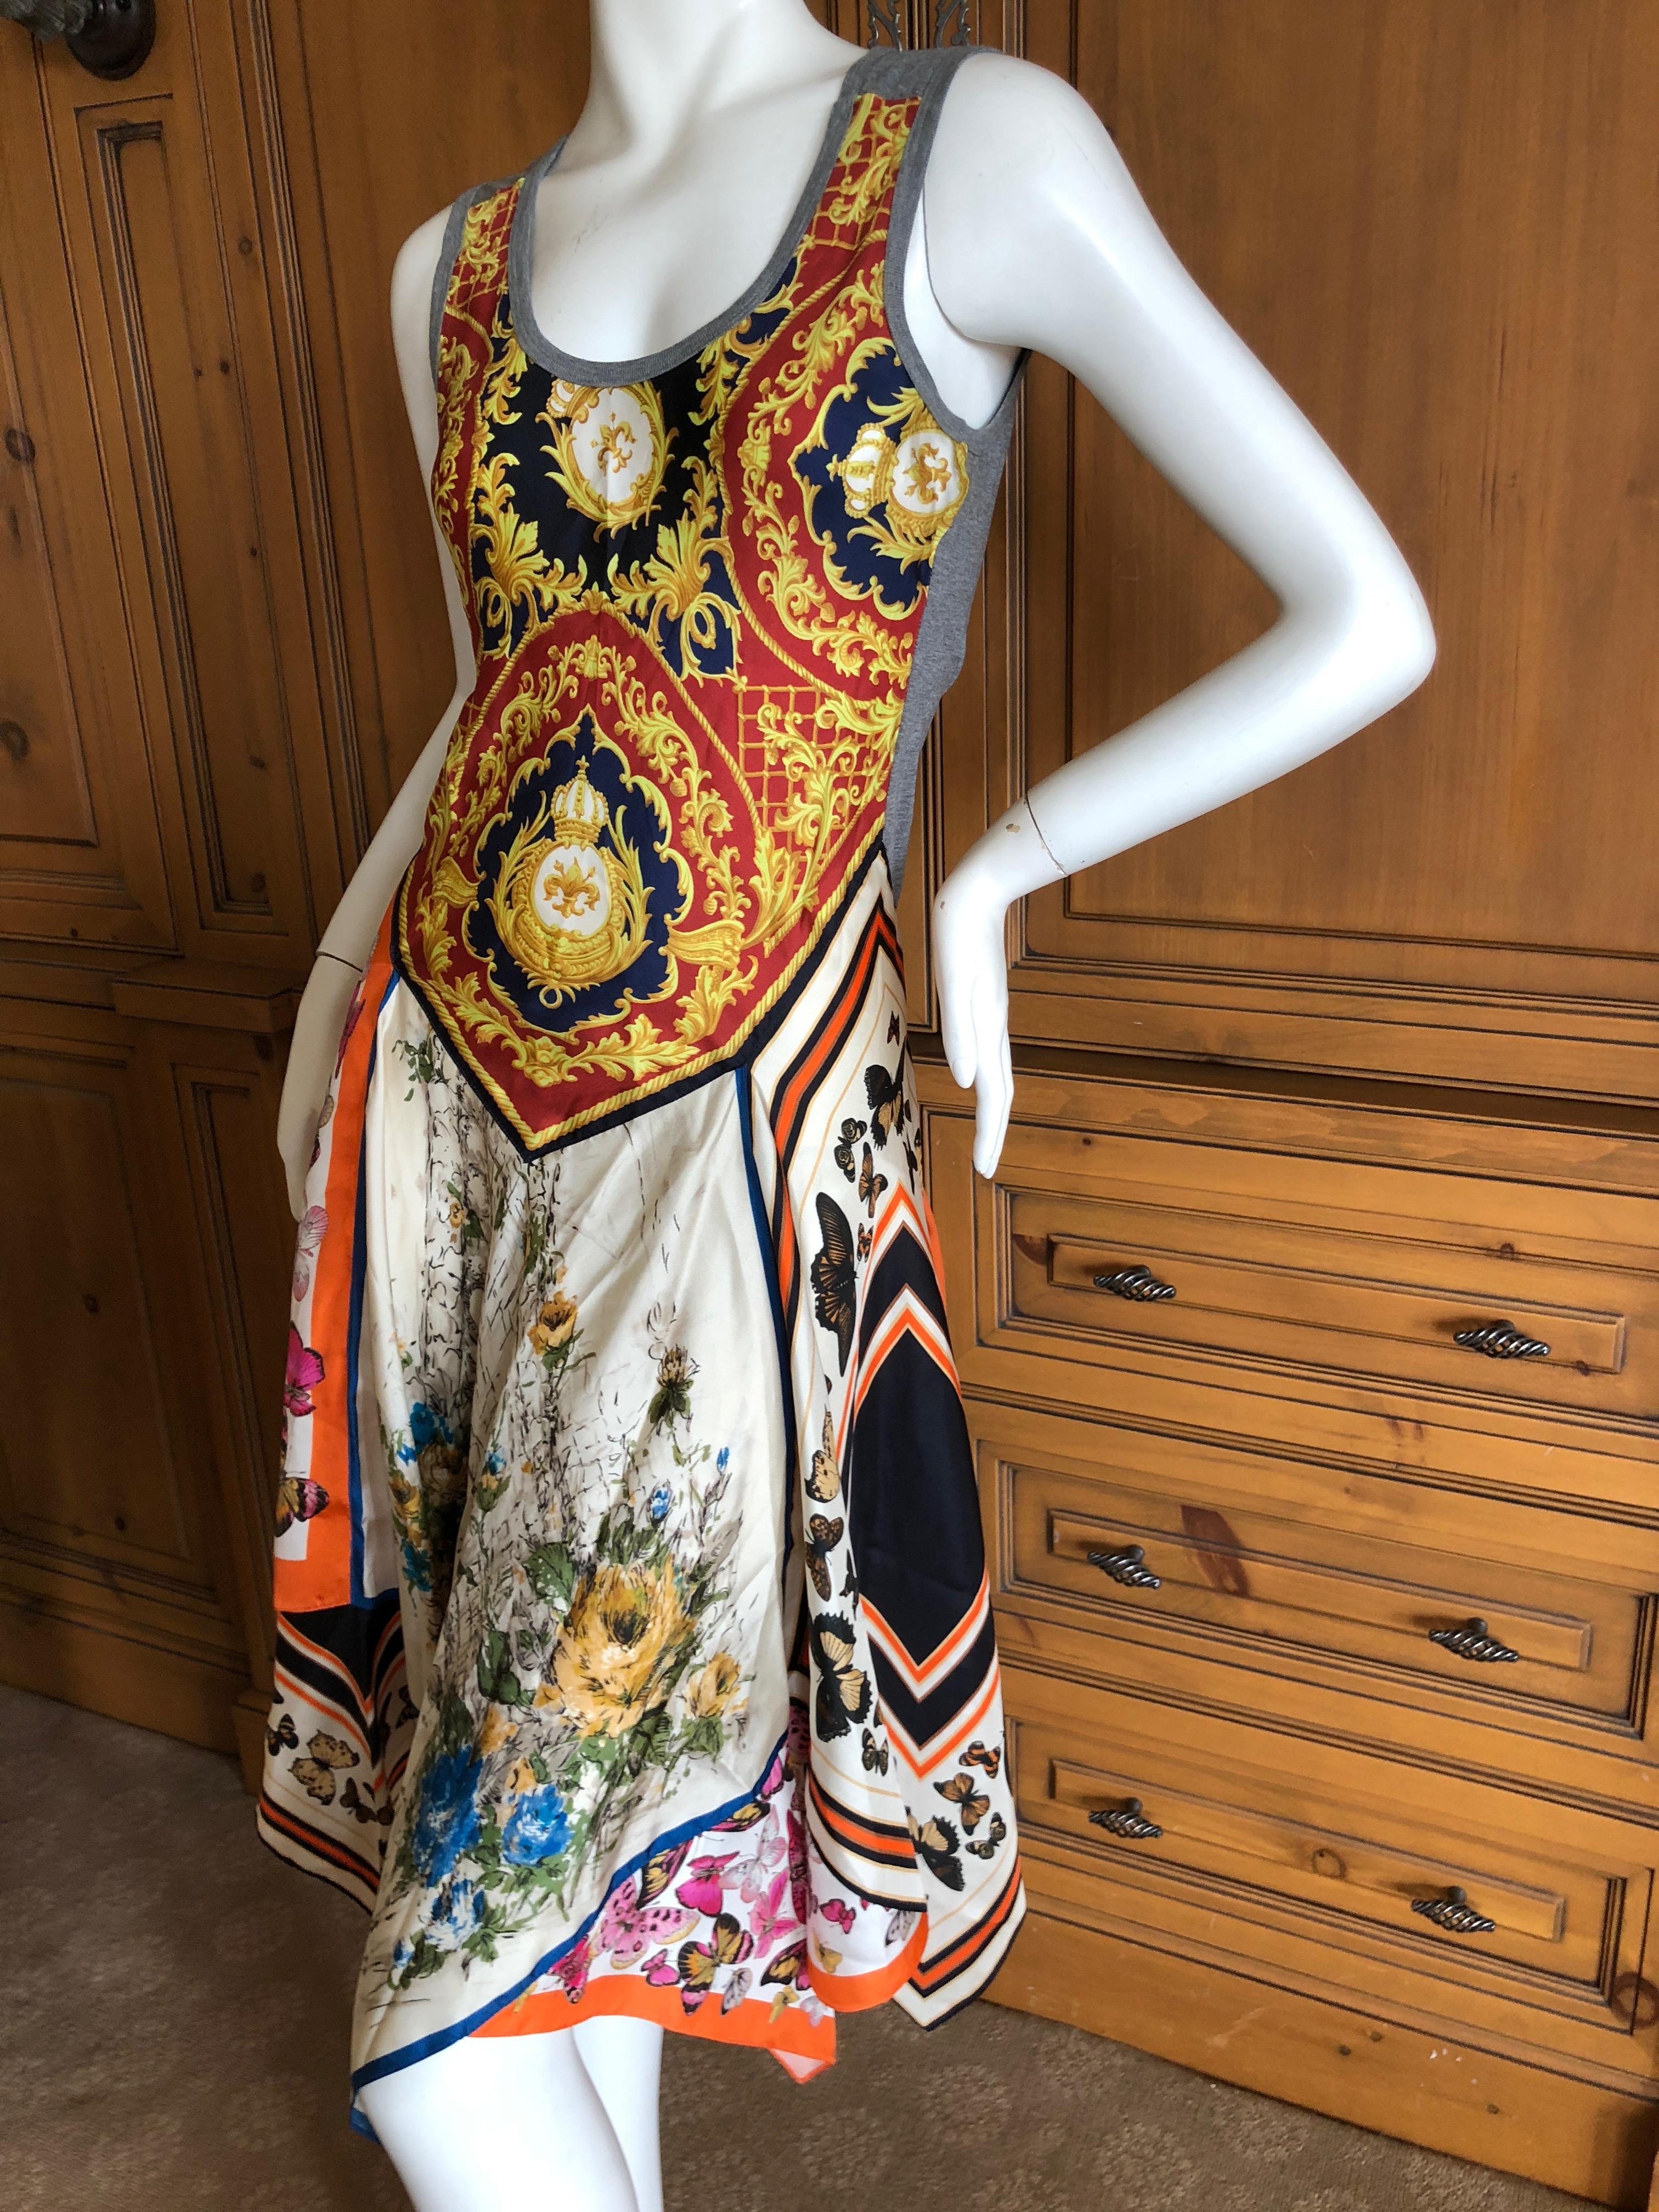 Dolce & Gabbana for D&G Vintage Silk Dress with Butterfly Print Handkerchief Hem
  There is  a lot of stretch
Sie 40
Bust 36